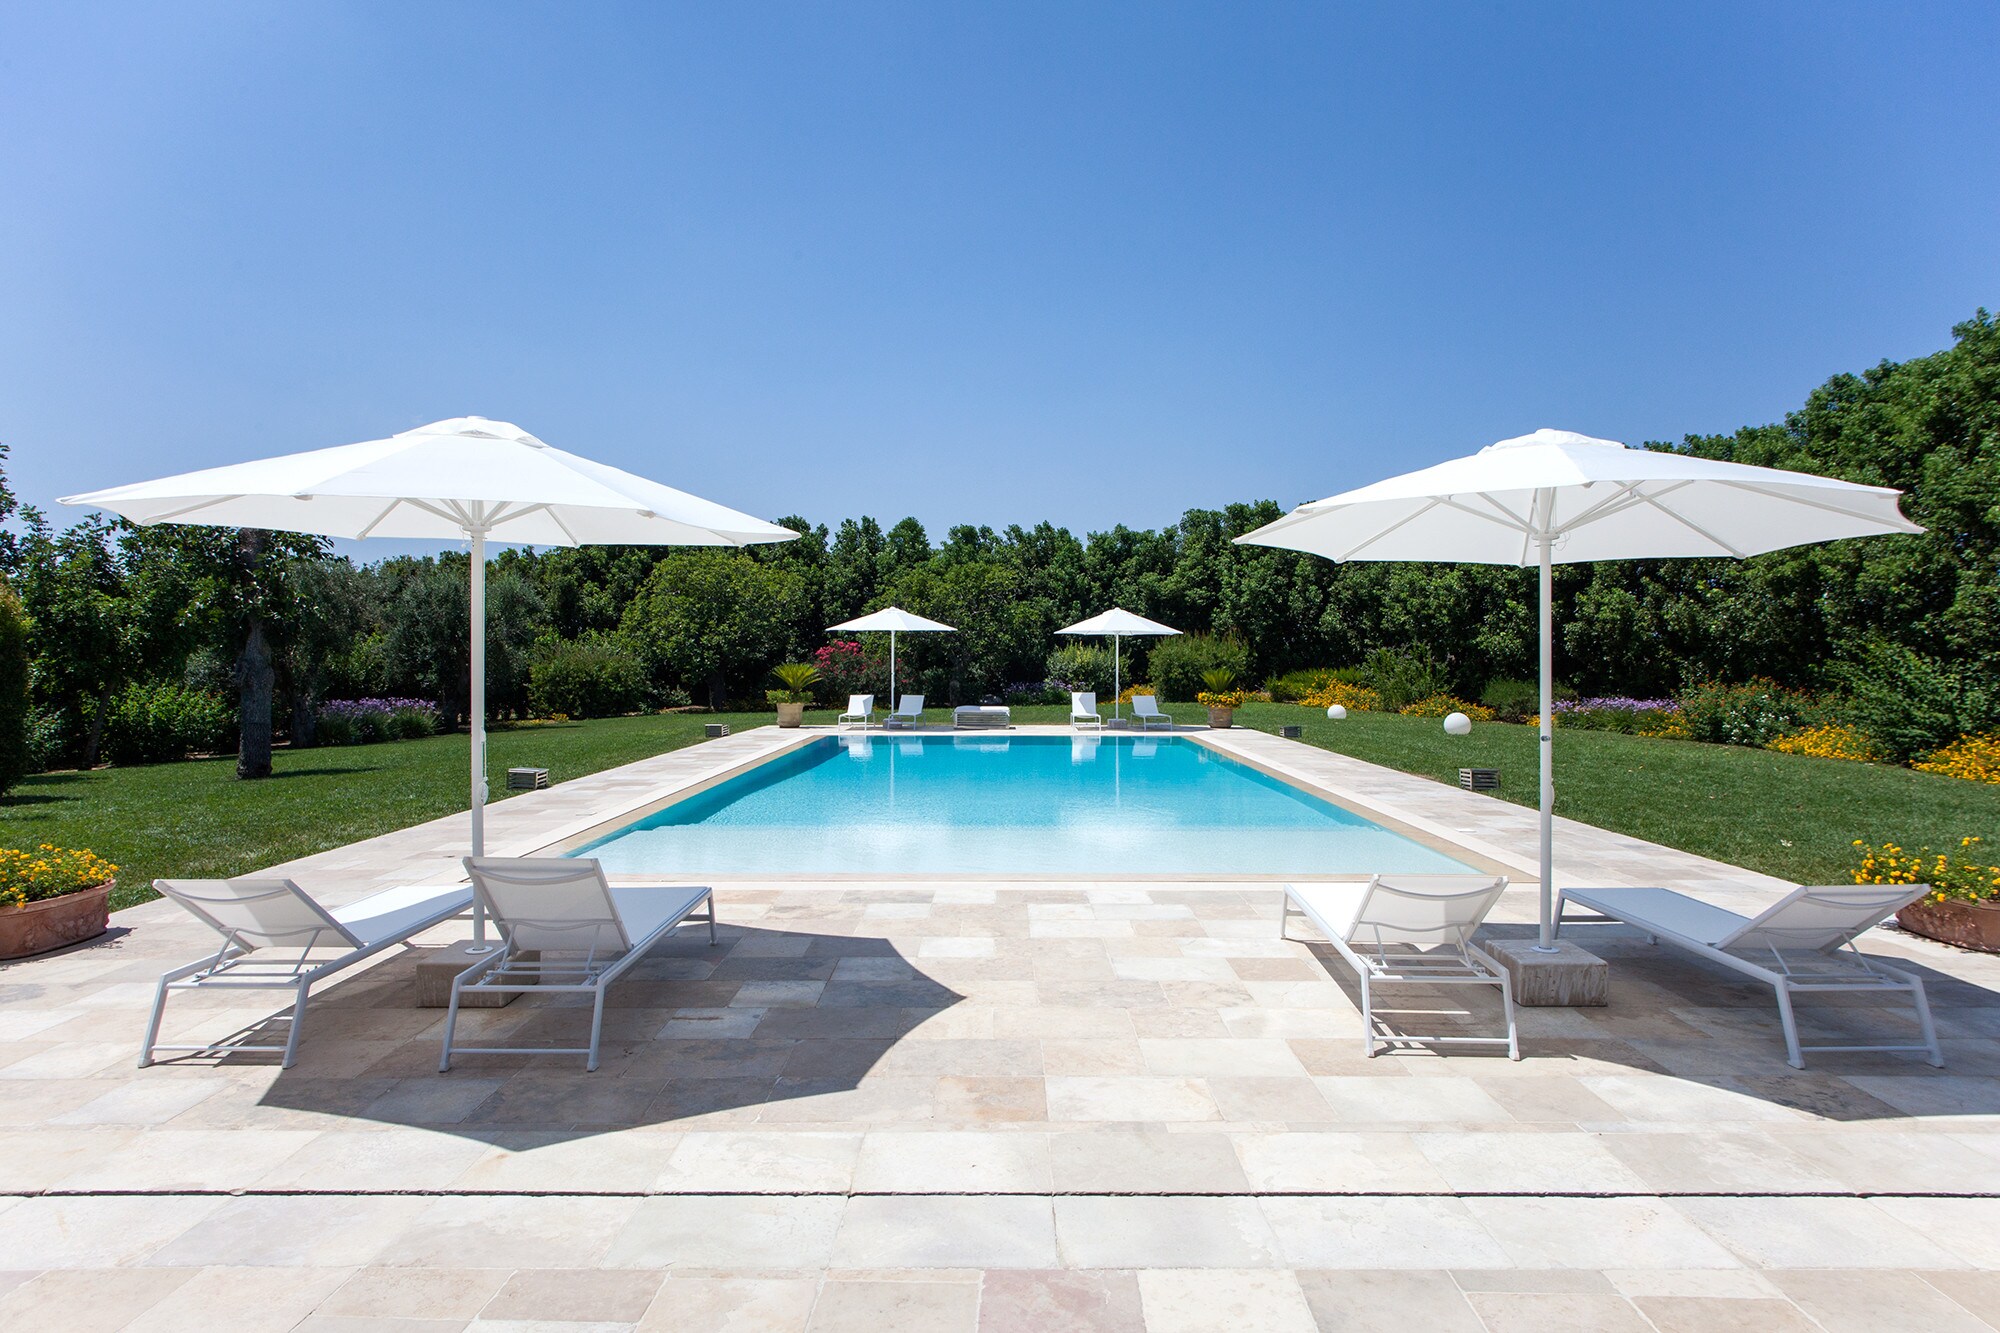 Property Image 1 - Luxury holiday villa with priavte pool in Puglia, 5 bedrooms m800